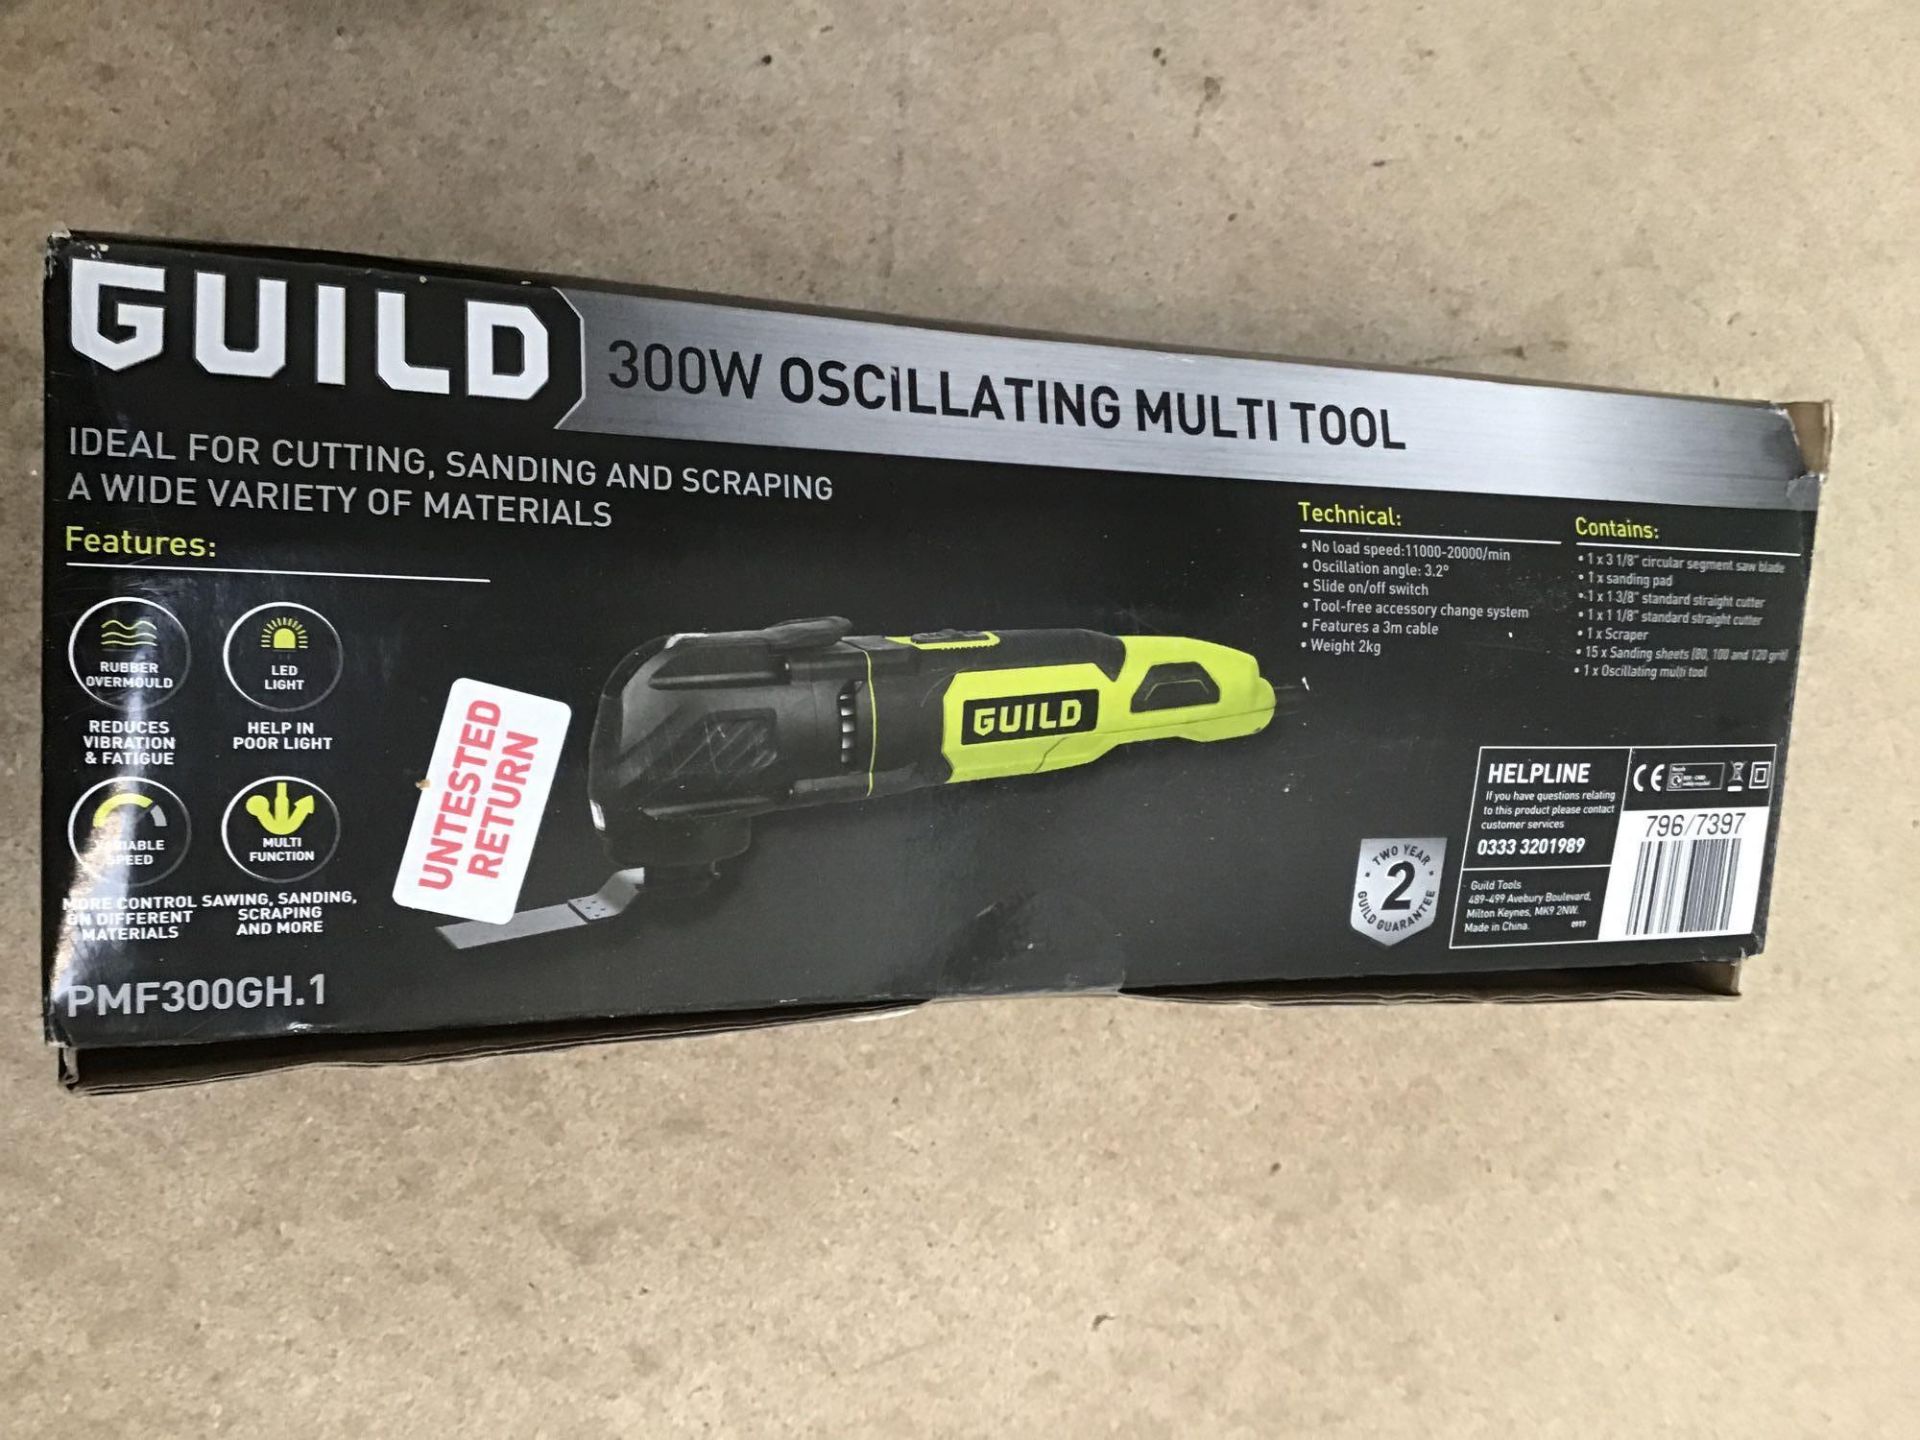 Guild 3-in-1 Multi-Tool with 20 Accessories – 300W, £40.00 RRP - Image 3 of 4